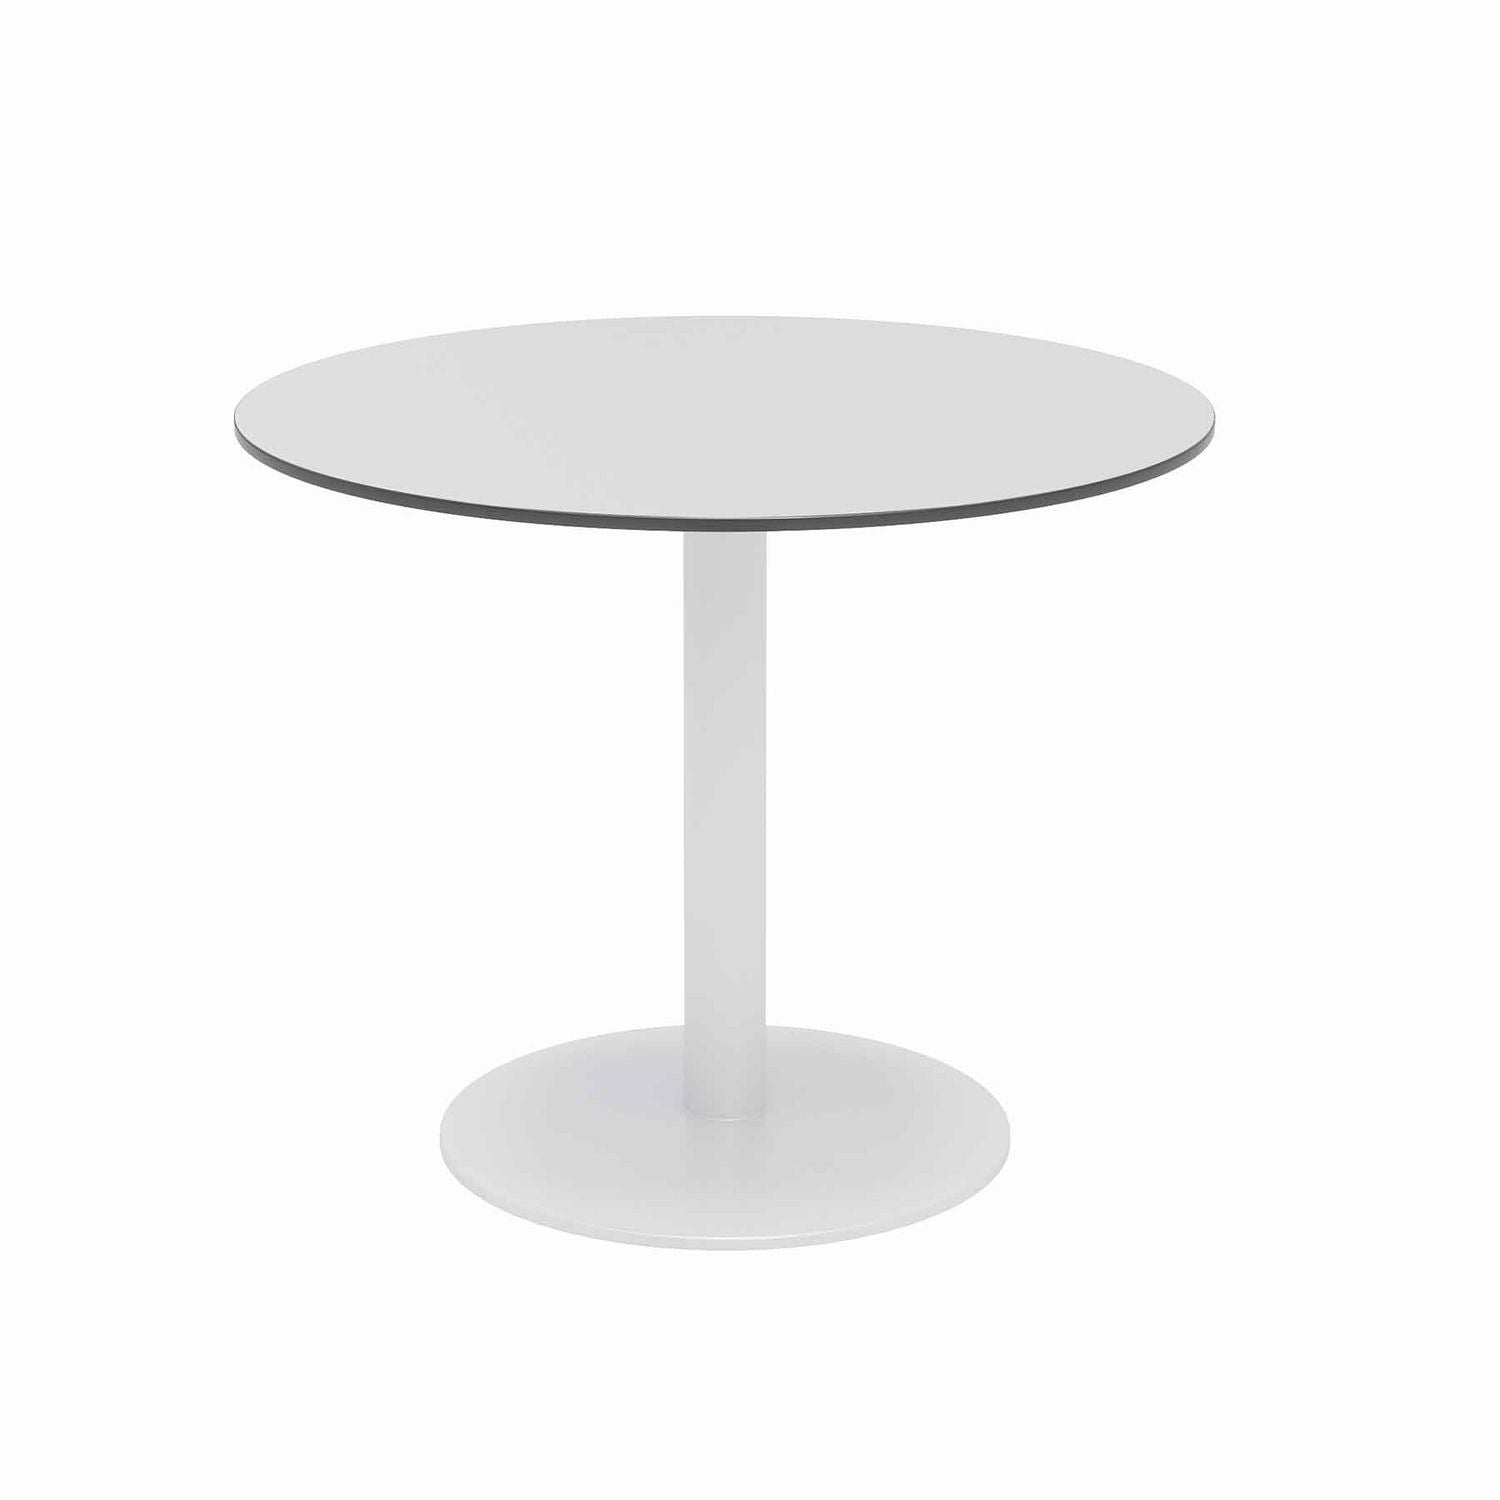 eveleen-outdoor-patio-table-4-mocha-powder-coated-polymer-chairs-round-36-dia-x-29h-fashion-gray-ships-in-4-6-bus-days_kfi840031918482 - 2